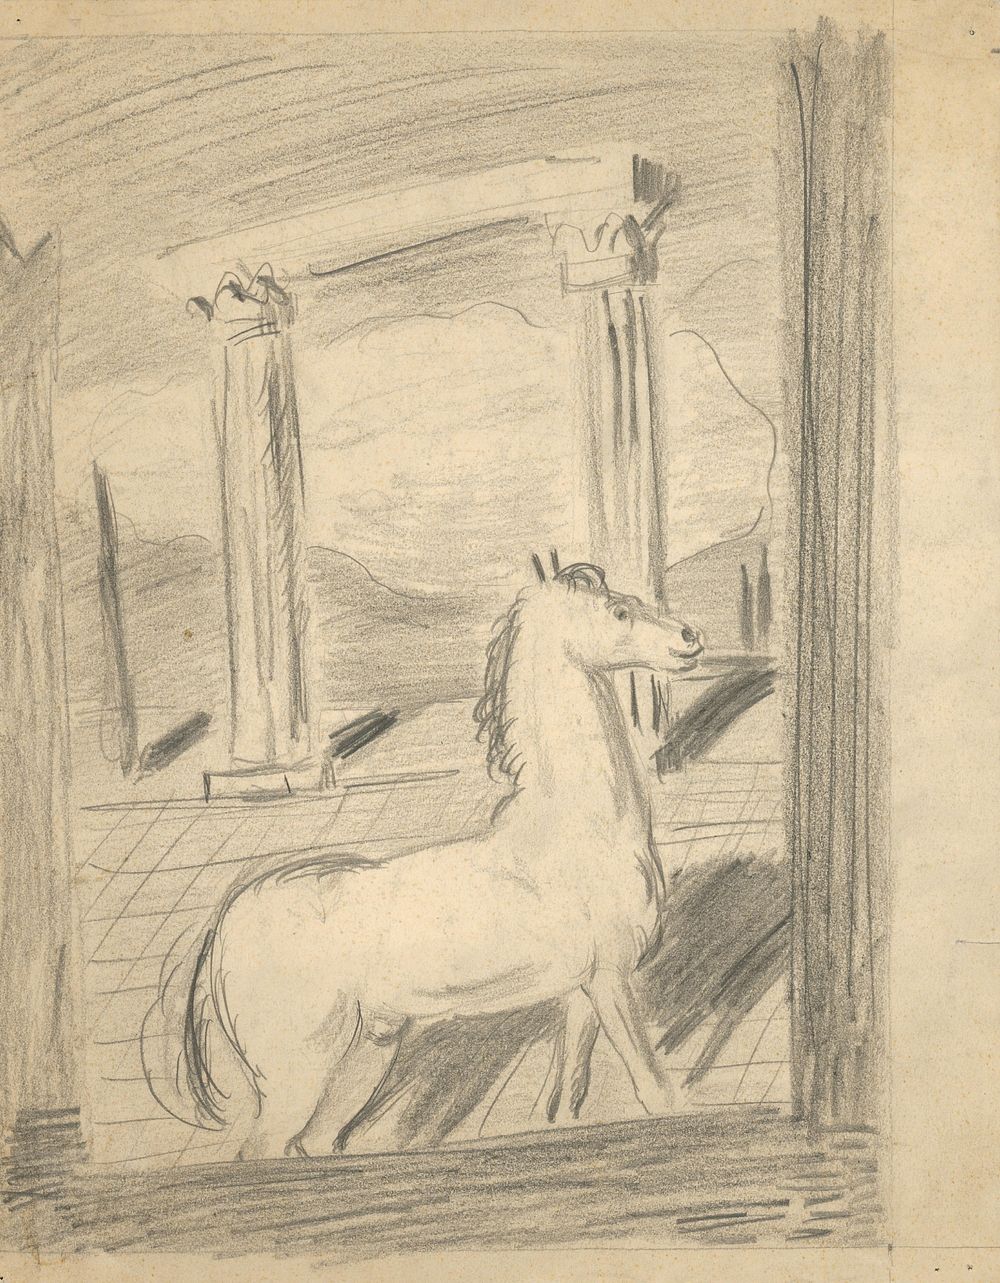 Sketch for the painting lonely horse by Cyprián Majerník